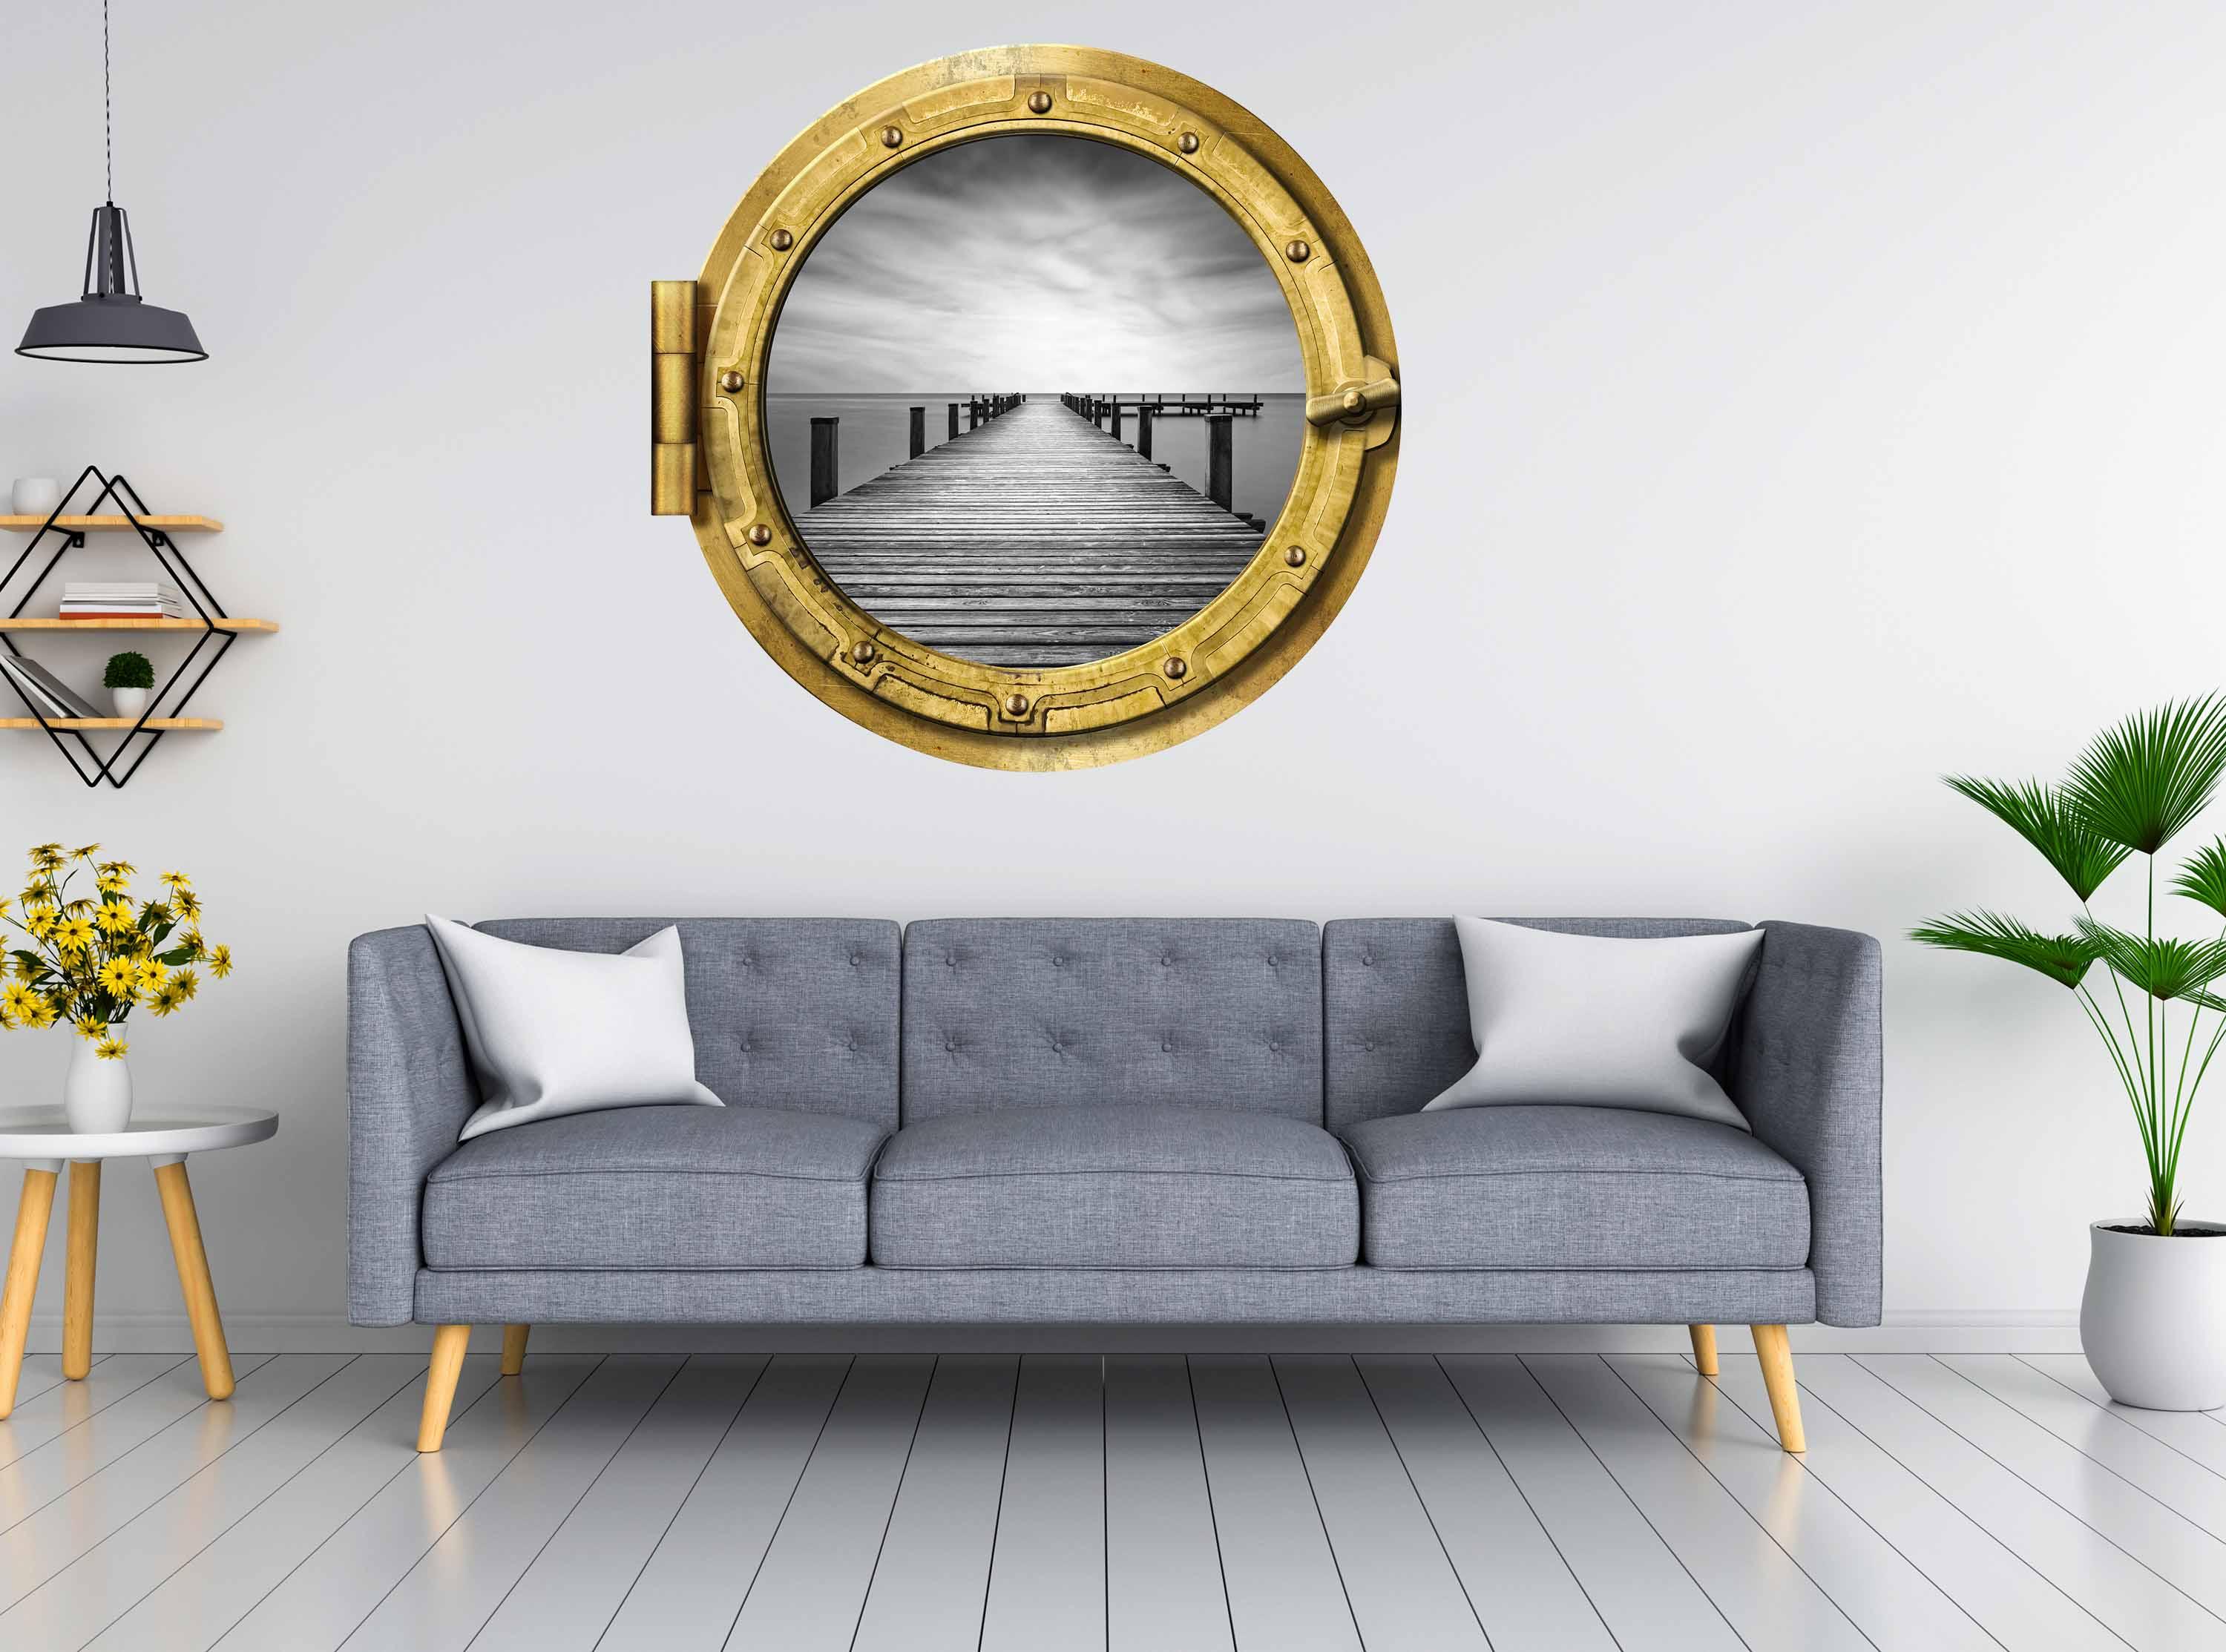 BW Dock Over waters #009, Window Decal, removable wallpaper Home Decor